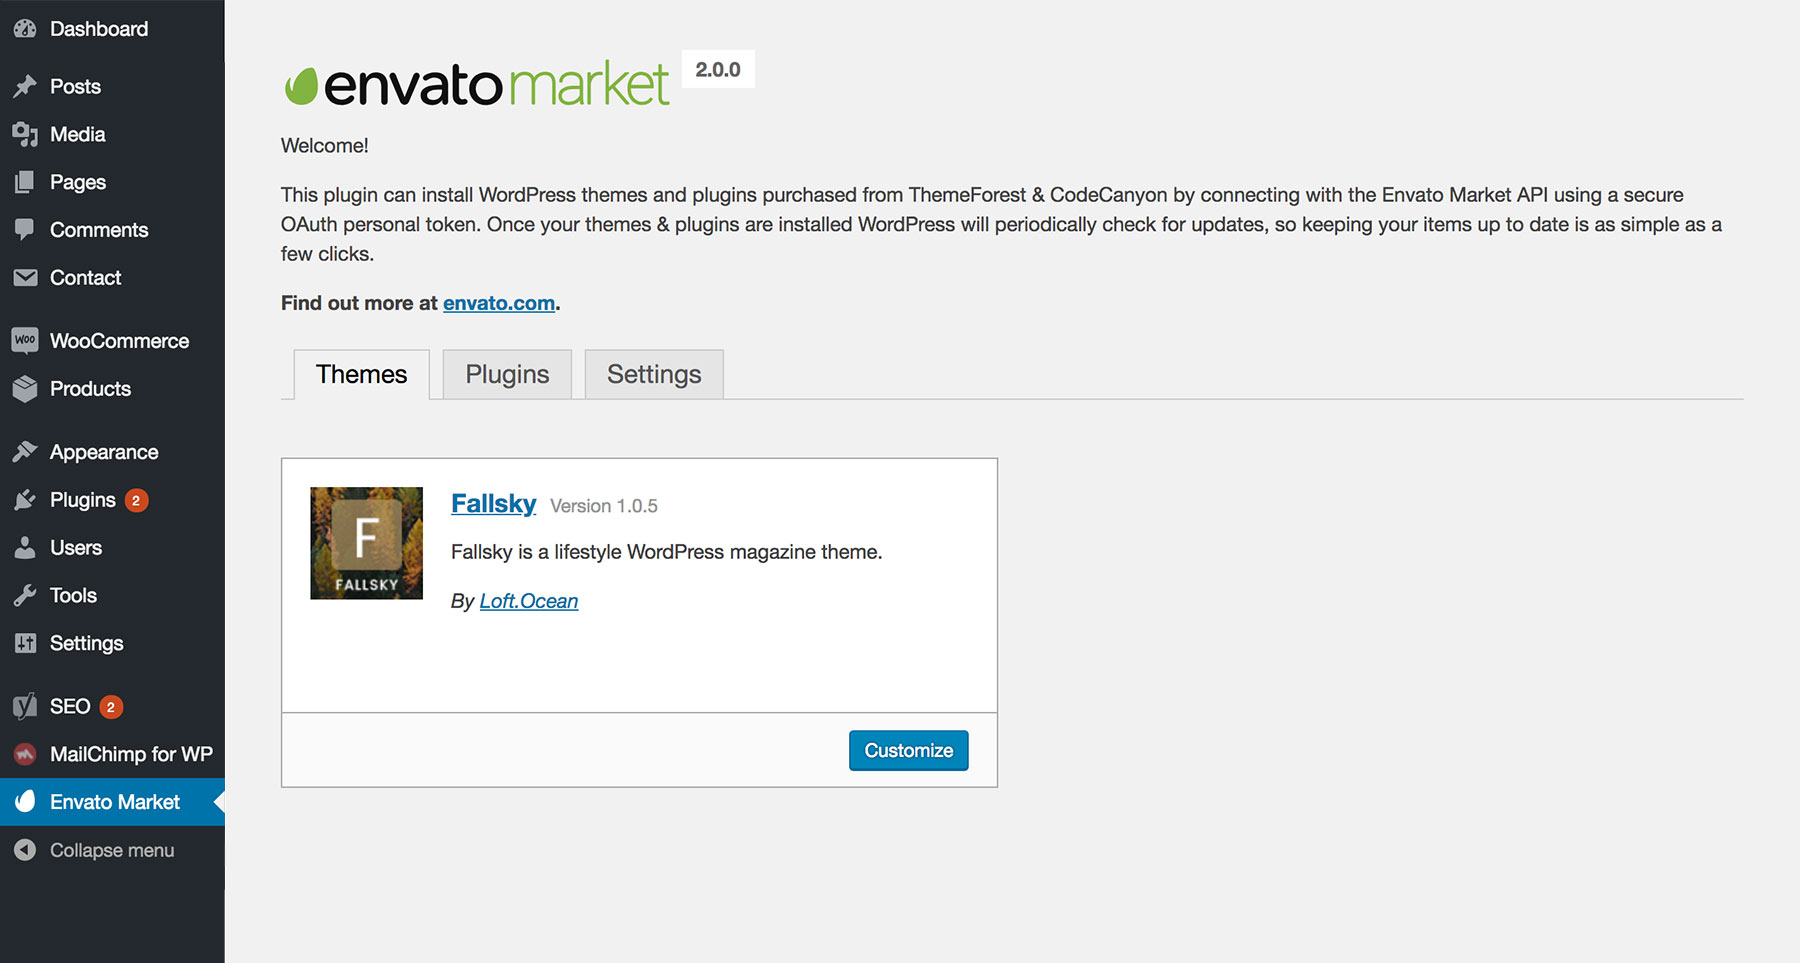 Items purchased from Envato will display on the page.